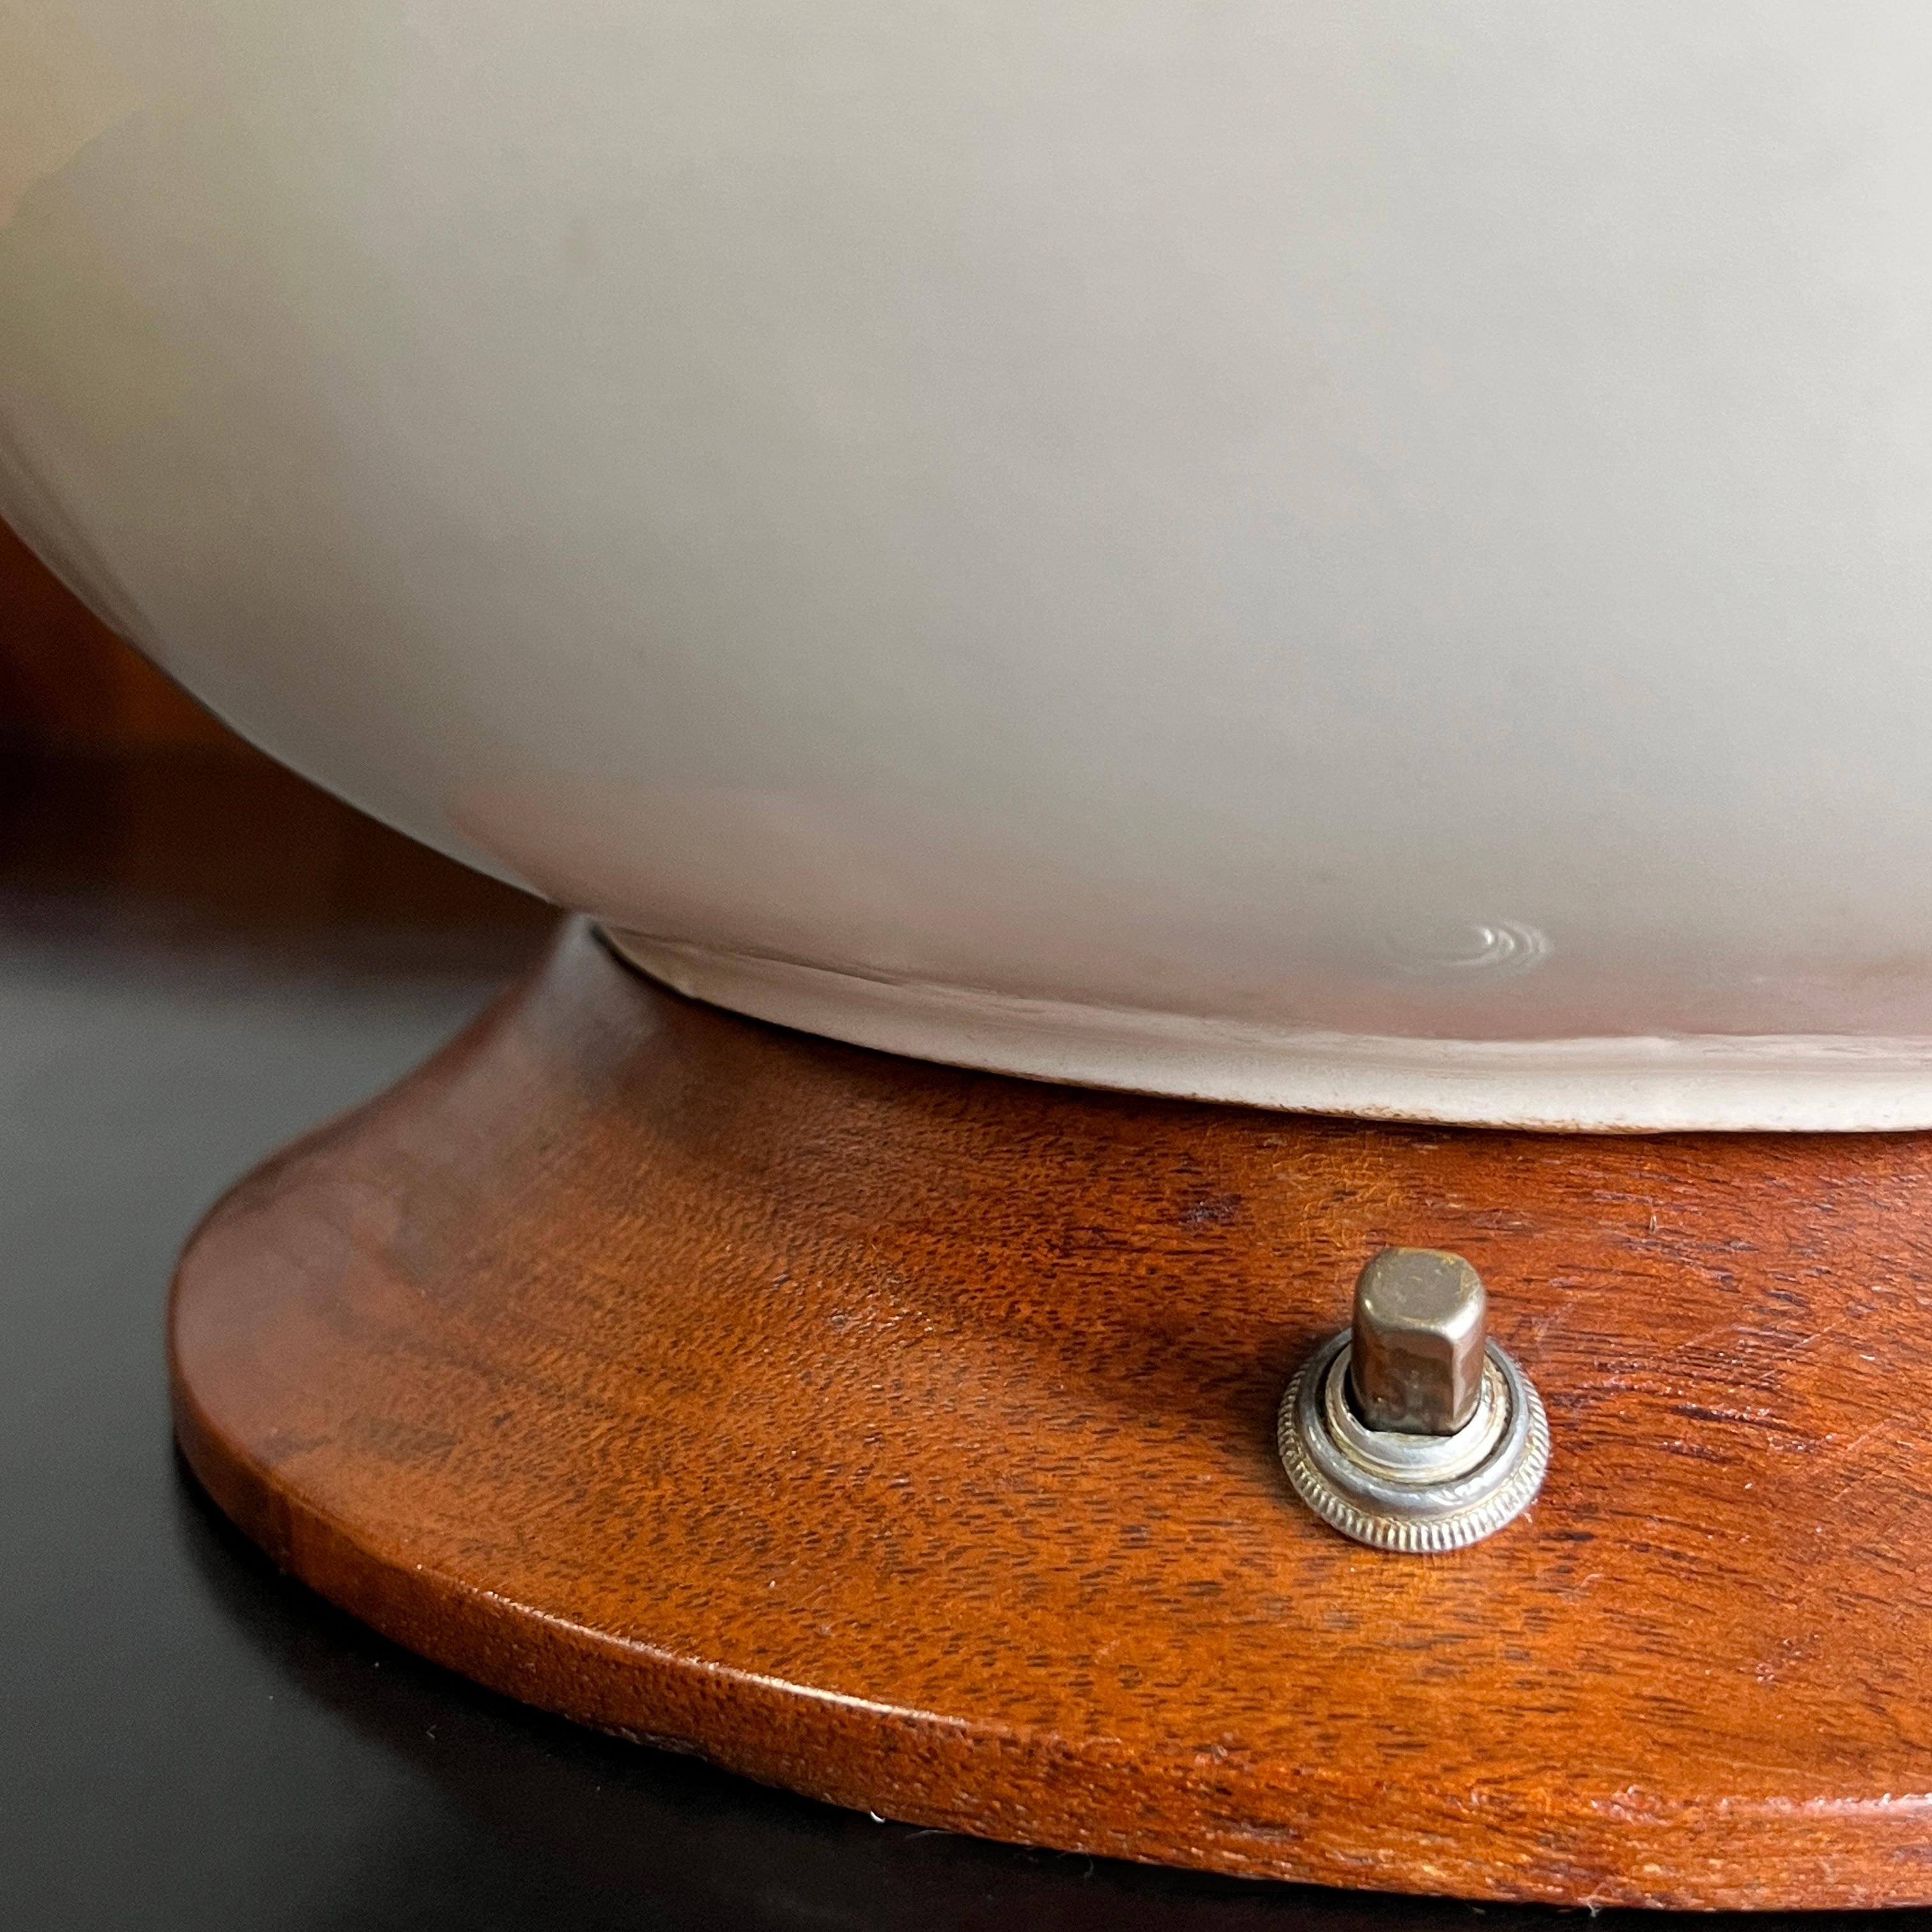 This pair of Mid-Century Modern table lamps features a circular bulbous ceramic body with a white glaze with wonderful crazing. The circular base and neck are made of teak with a warm patinated finish. The lamps are in working condition and wired to